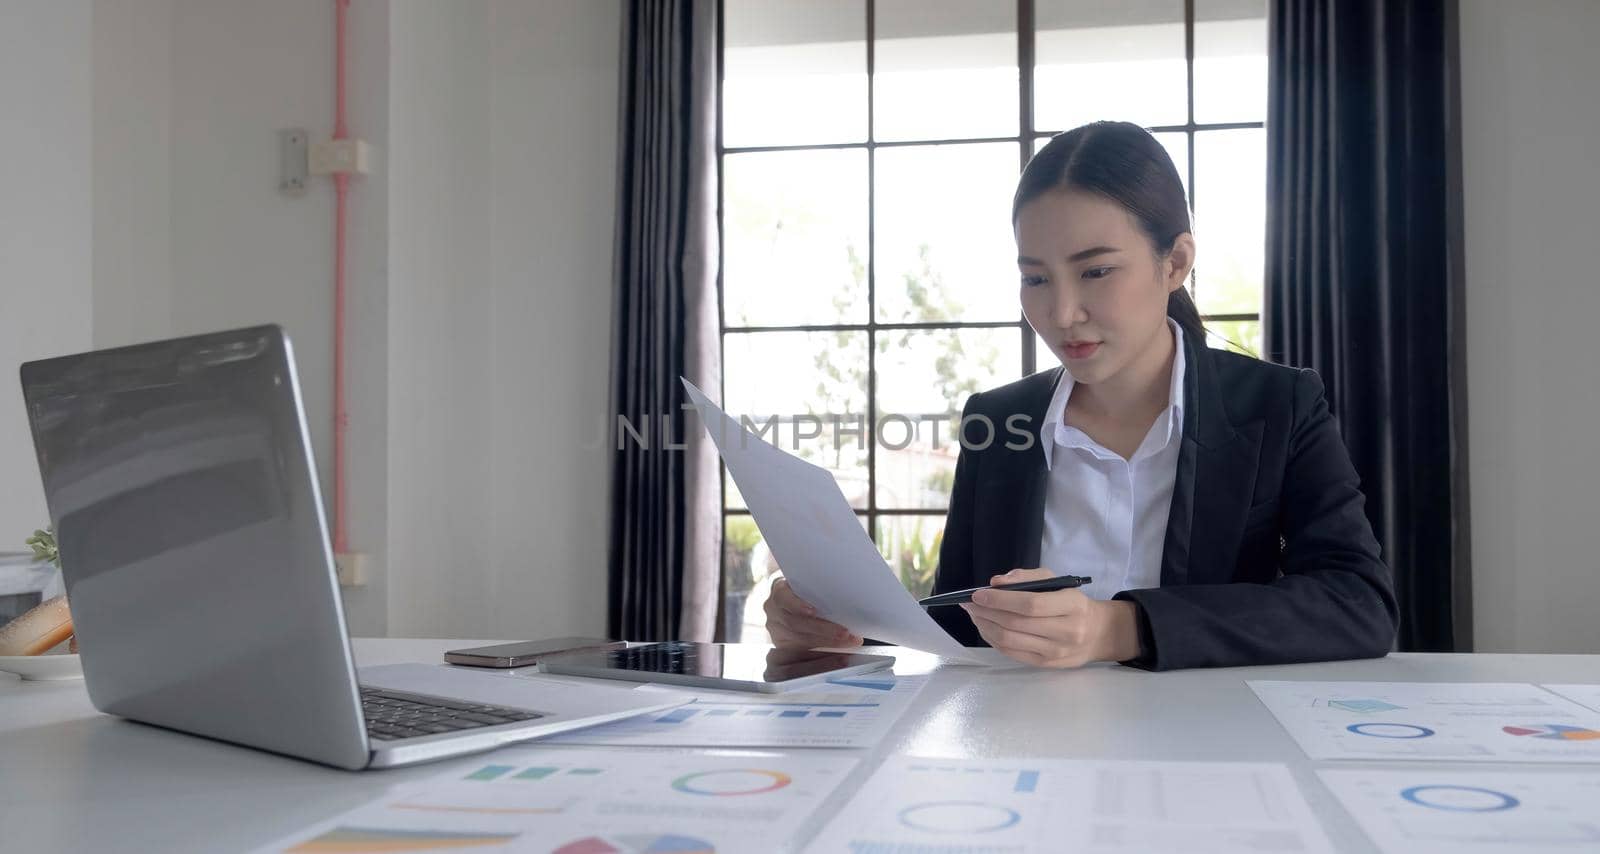 Portrait of an Asian woman working on a tablet computer in a modern office. Make an account analysis report. real estate investment information financial and tax system concepts.